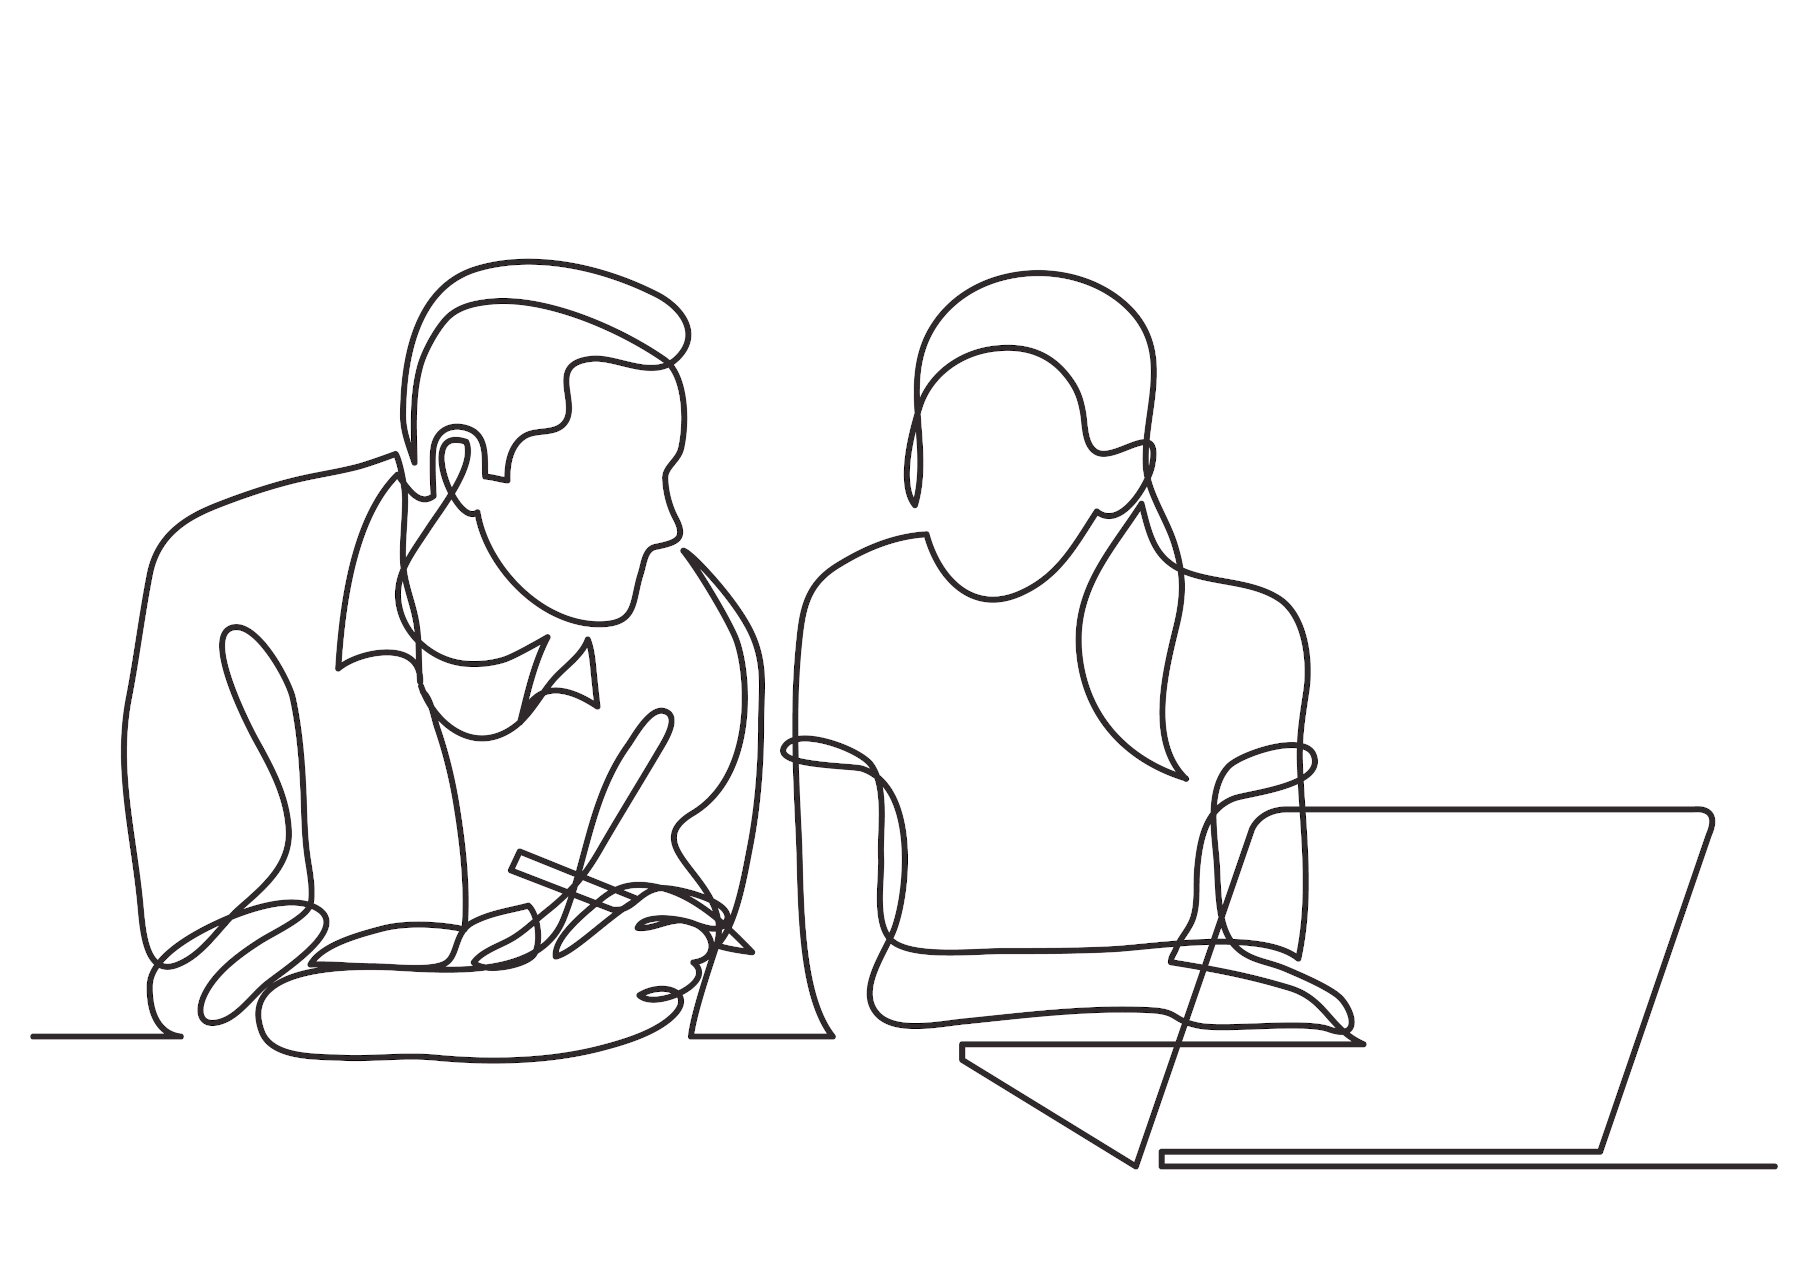 Line drawing of two people talking by a laptop